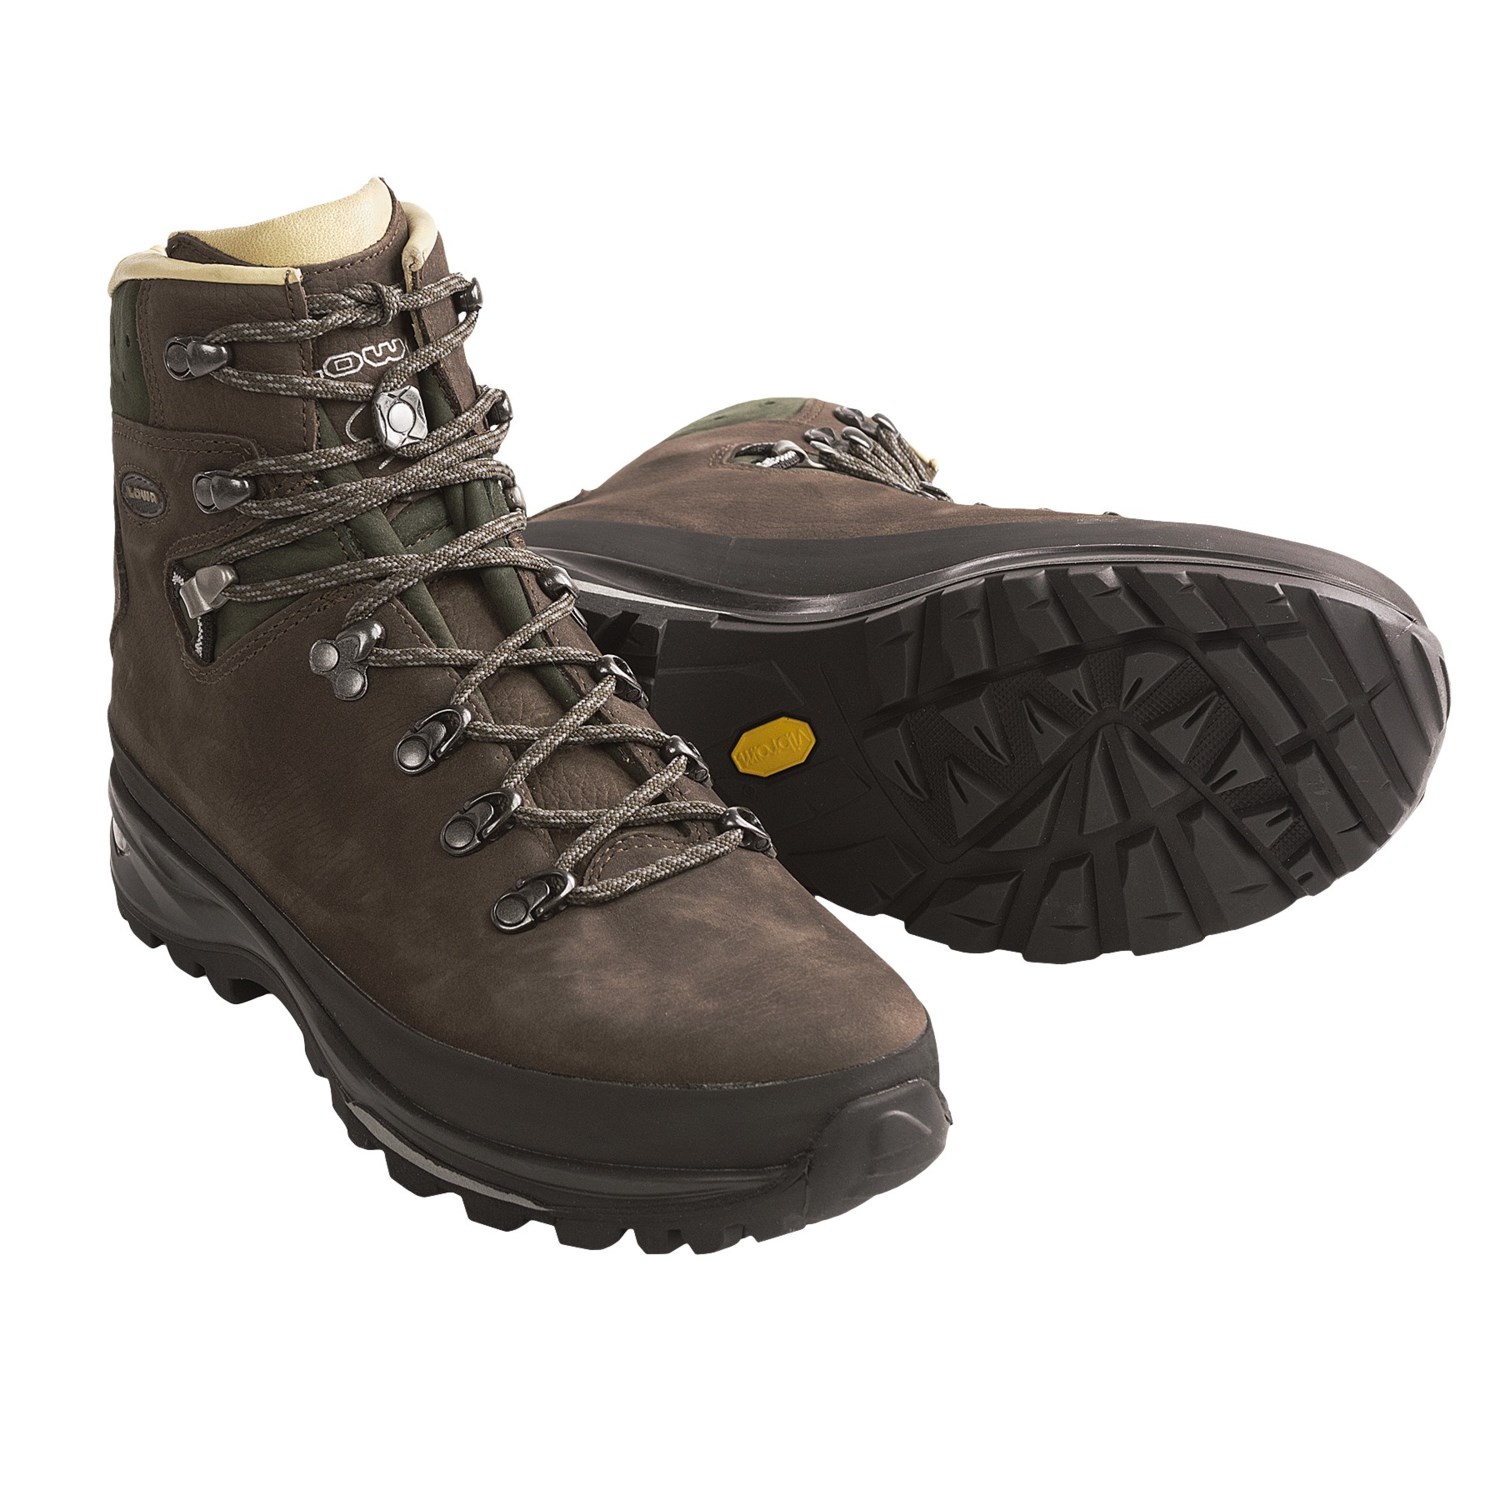 Lowa Baltoro Backpacking Boots (For Men) 6357W - Save 35%